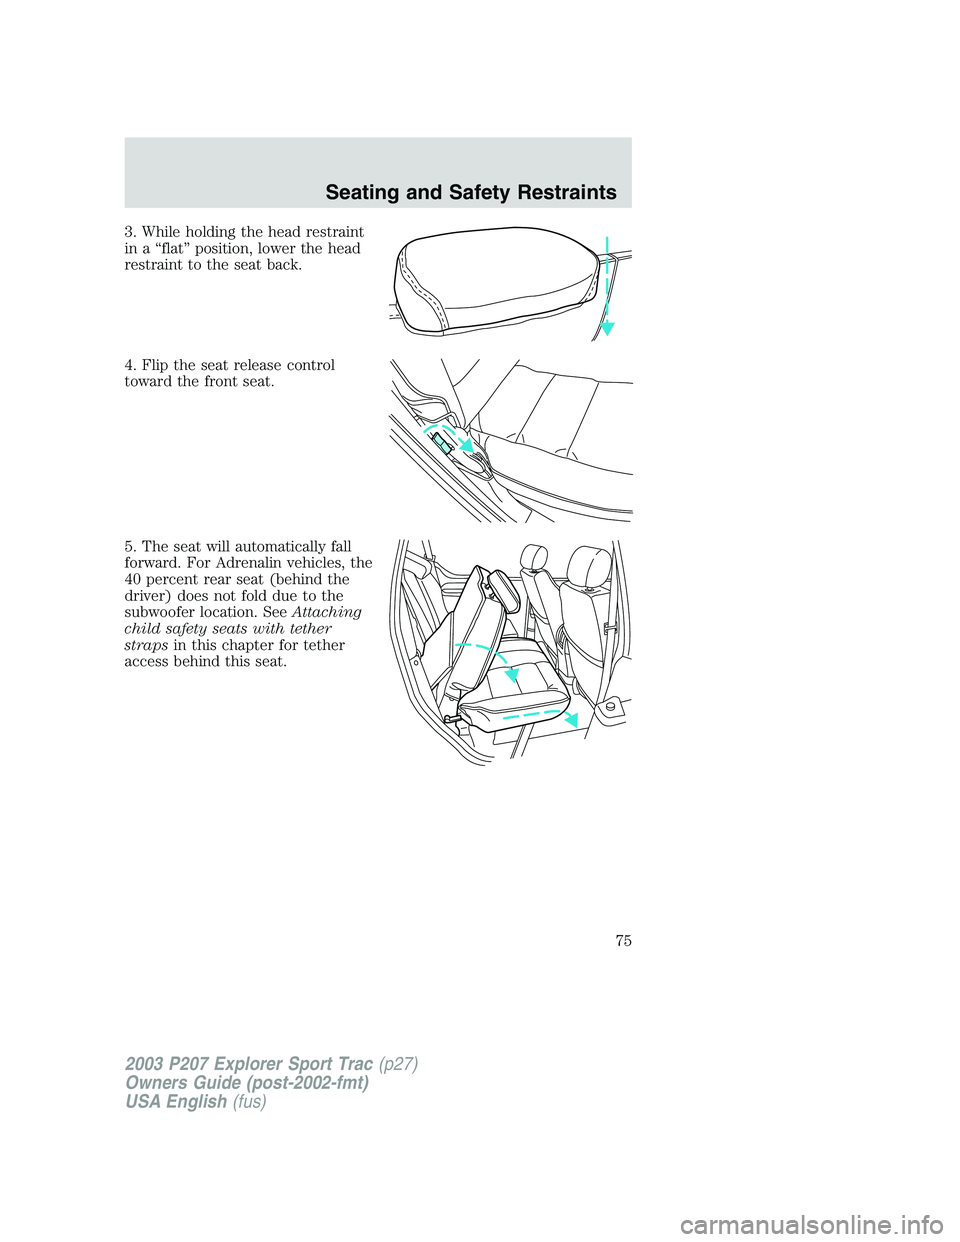 FORD EXPLORER SPORT TRAC 2003  Owners Manual 3. While holding the head restraint
in a “flat” position, lower the head
restraint to the seat back.
4. Flip the seat release control
toward the front seat.
5. The seat will automatically fall
for